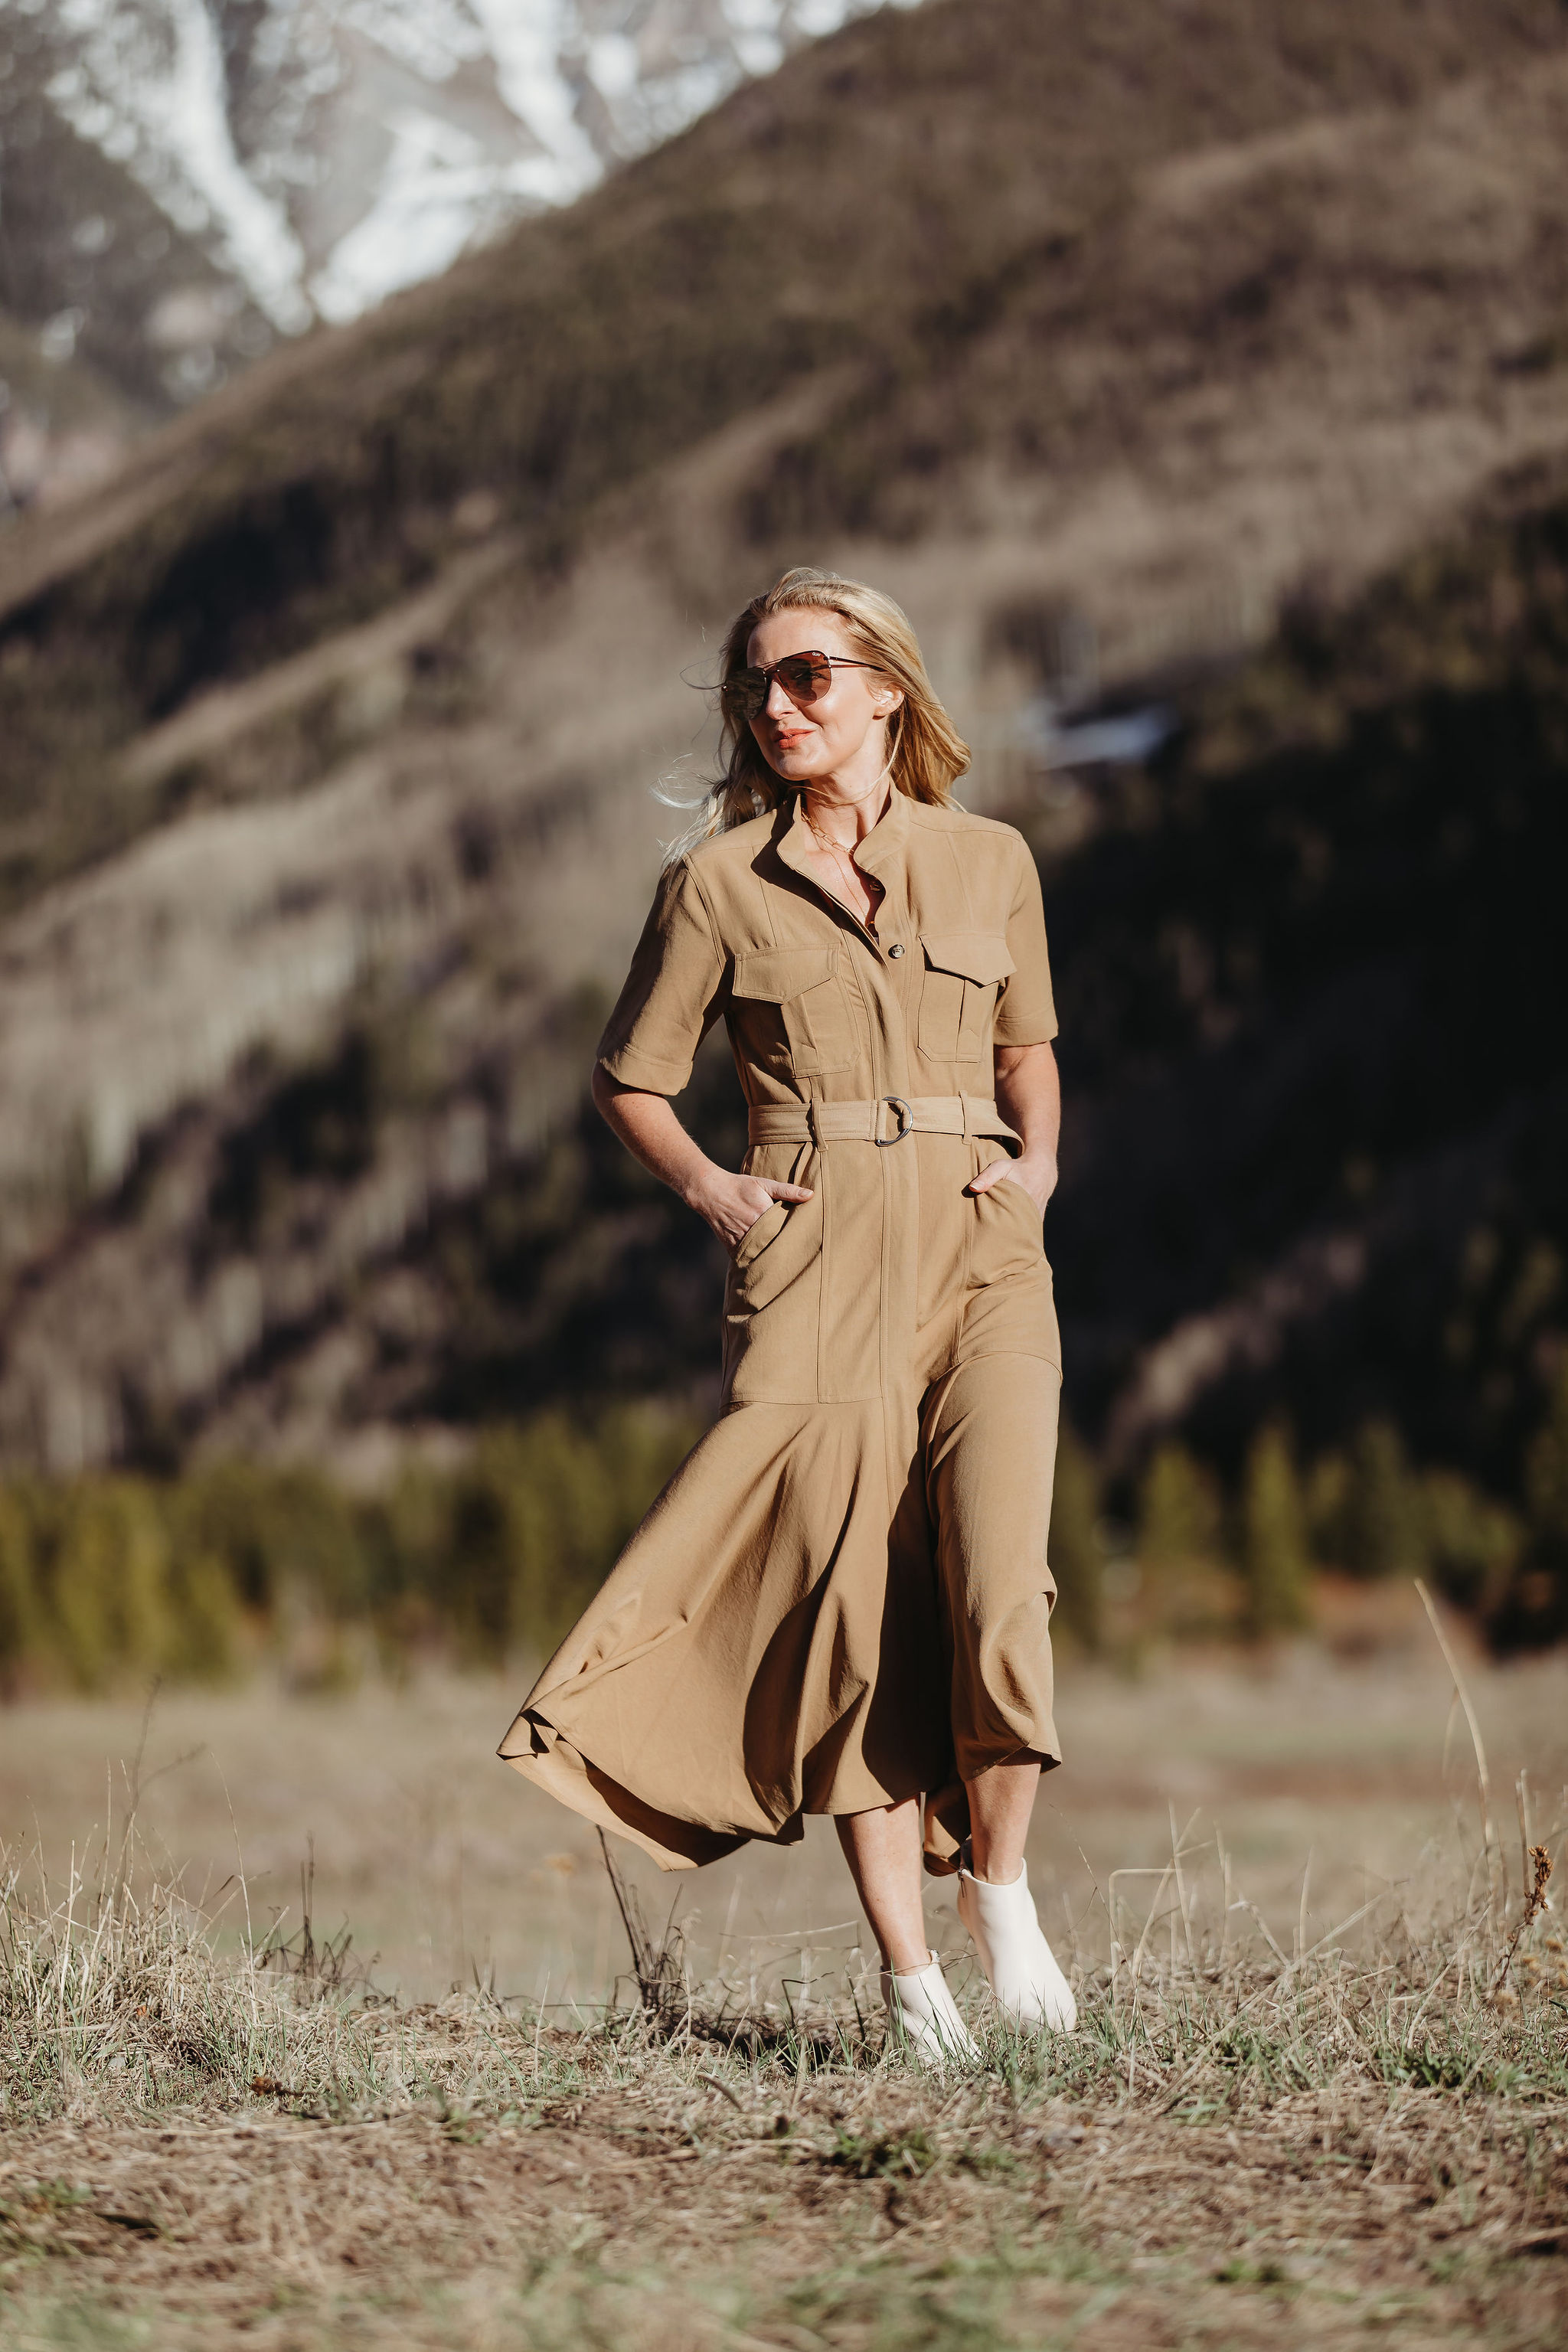 Africa Outfits, Erin Busbee of Busbee Style wearing a tan belted shirtdress by ALC with white booties in Telluride, Colorado